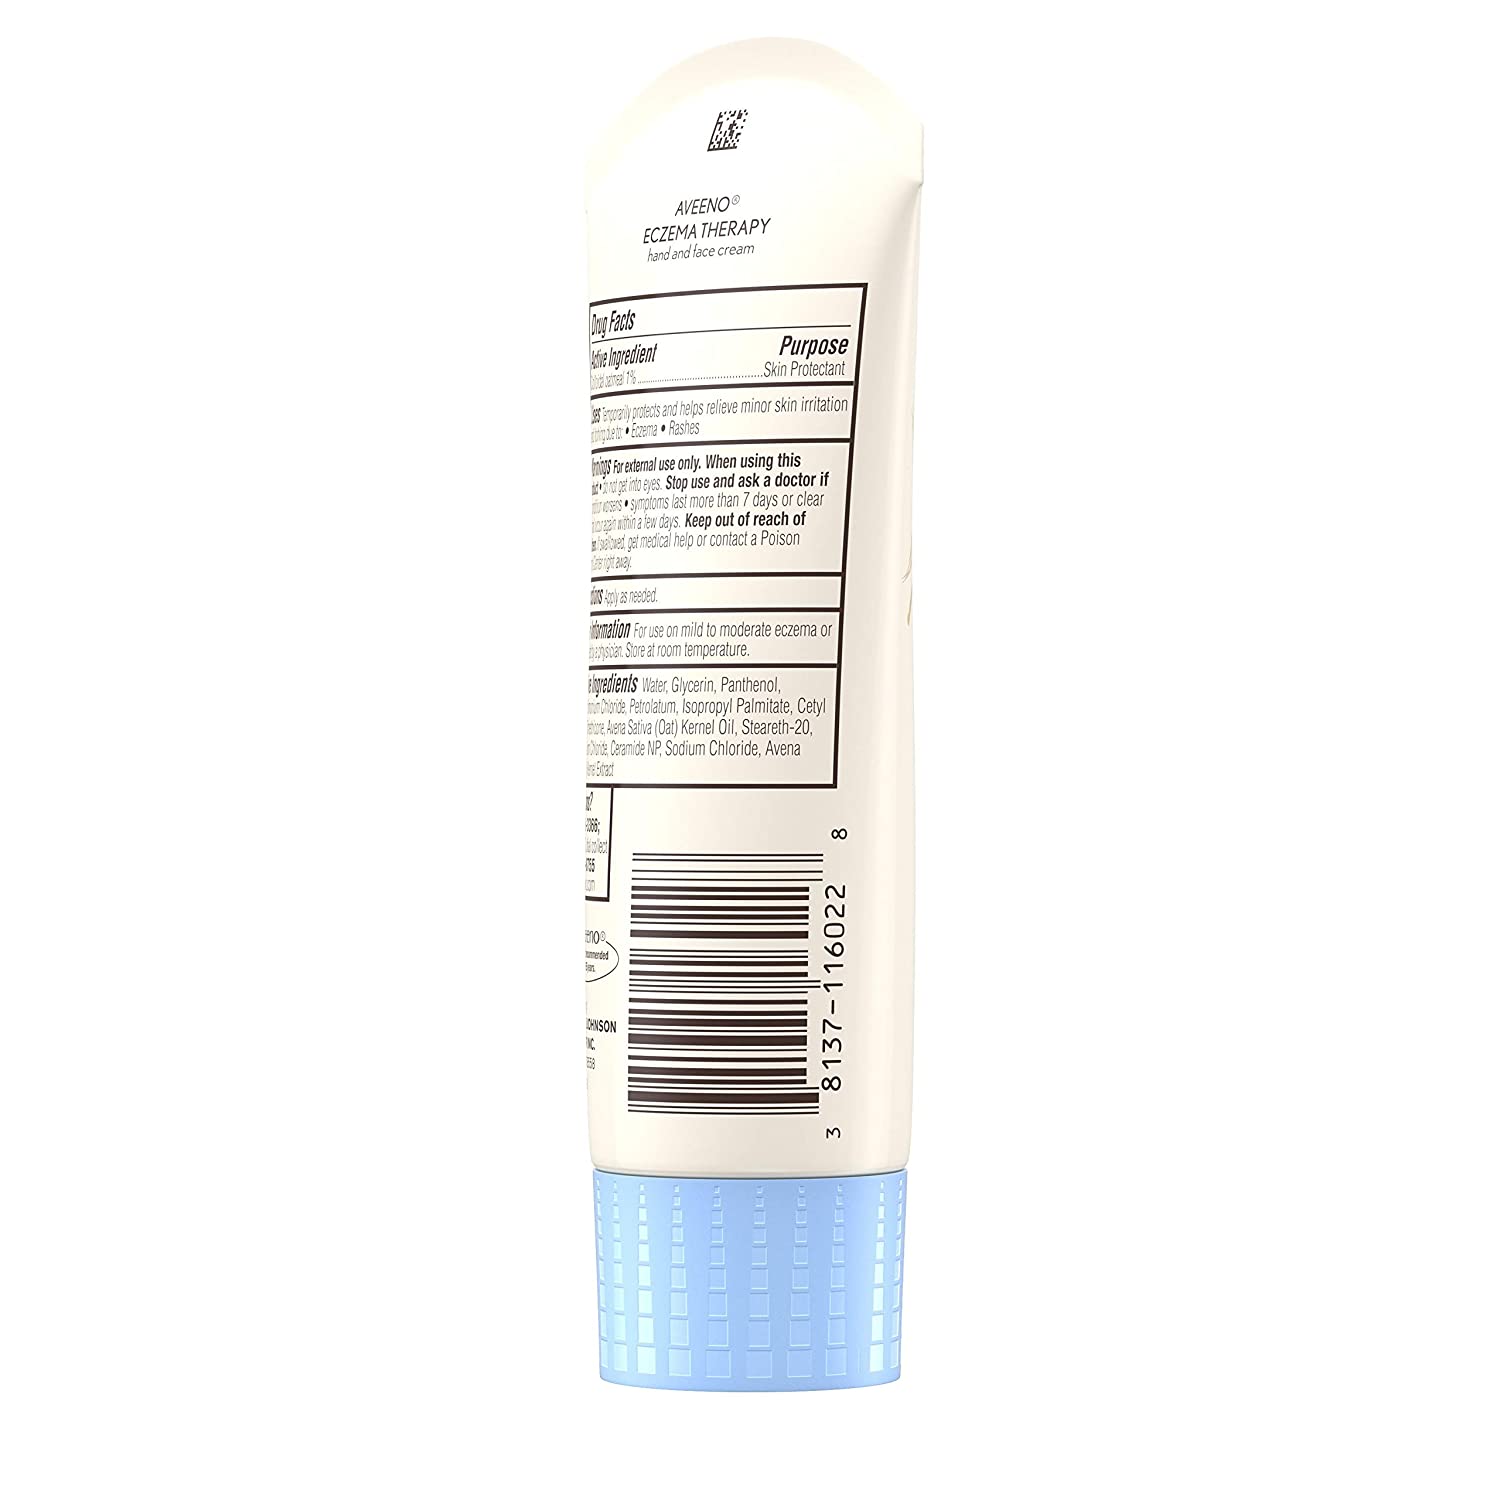 AVEENO Active Naturals Eczema Therapy Hand Cream 2.60 oz (Pack of 4) - image 3 of 4